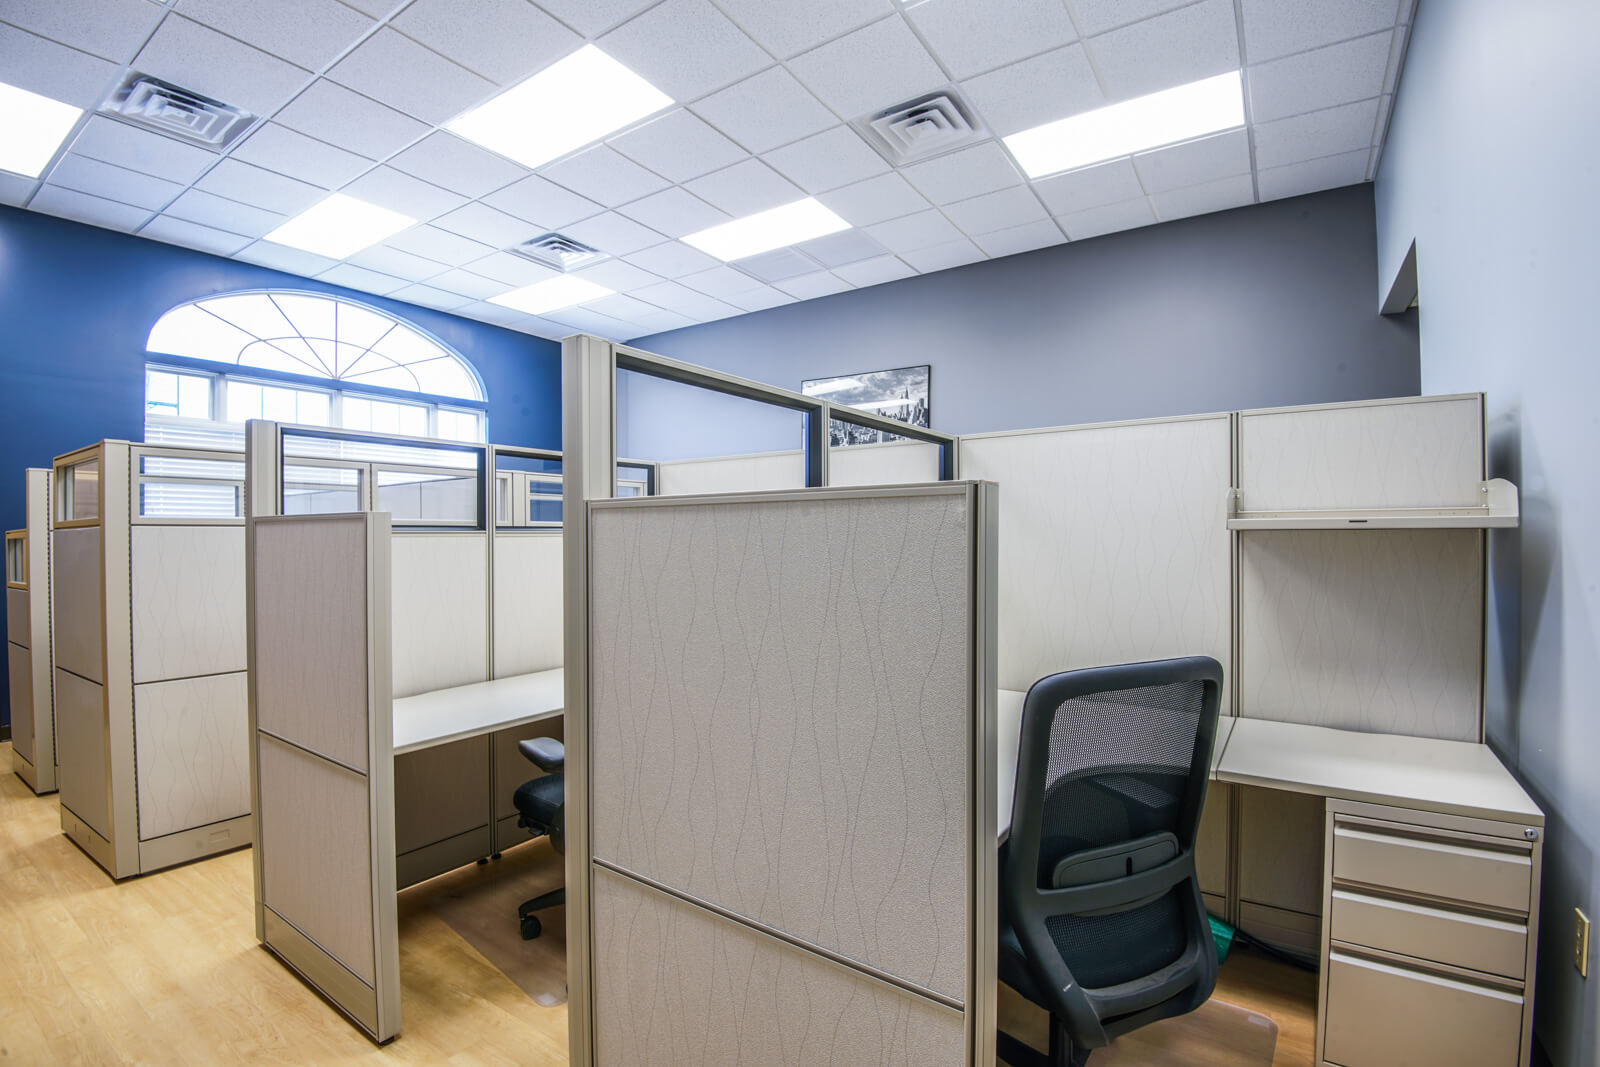 New cubicles